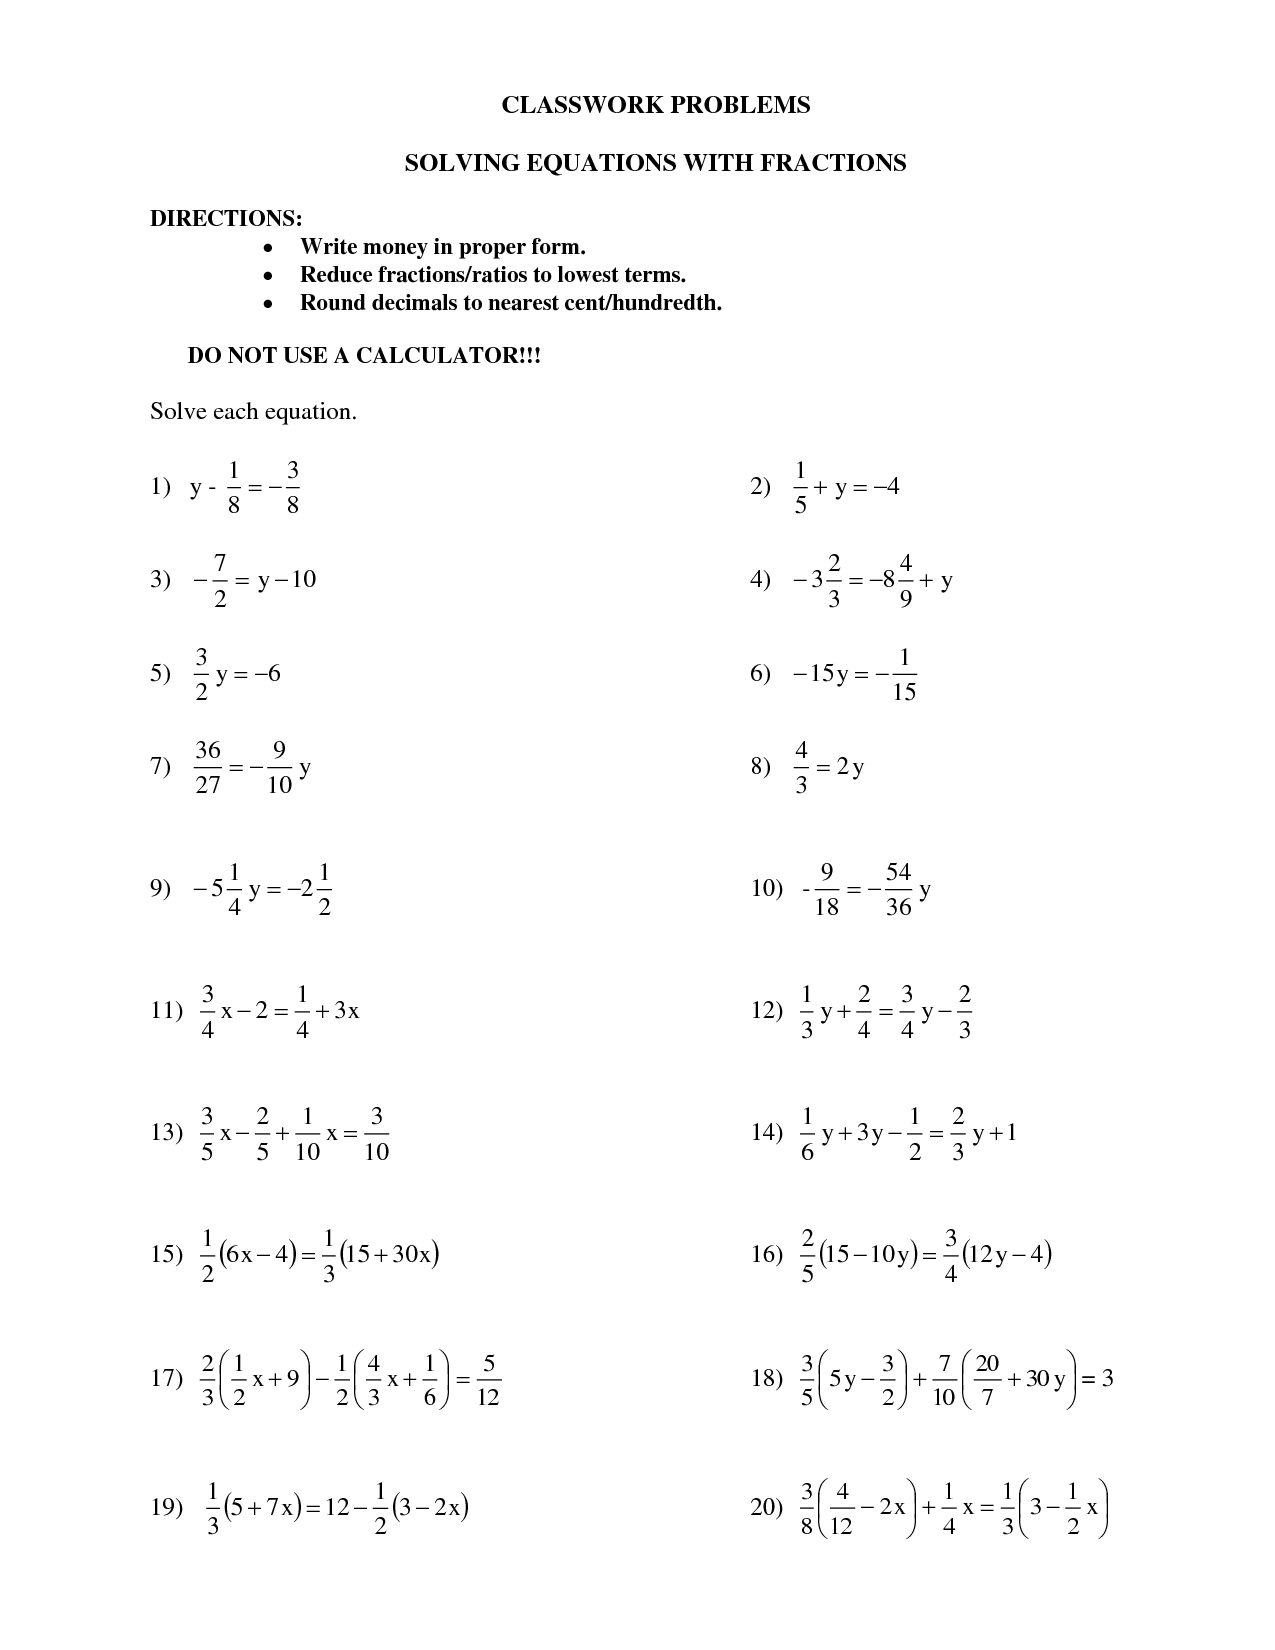 Solving Equations With Fractions Worksheet Pdf - Nidecmege For Solving Equations With Fractions Worksheet